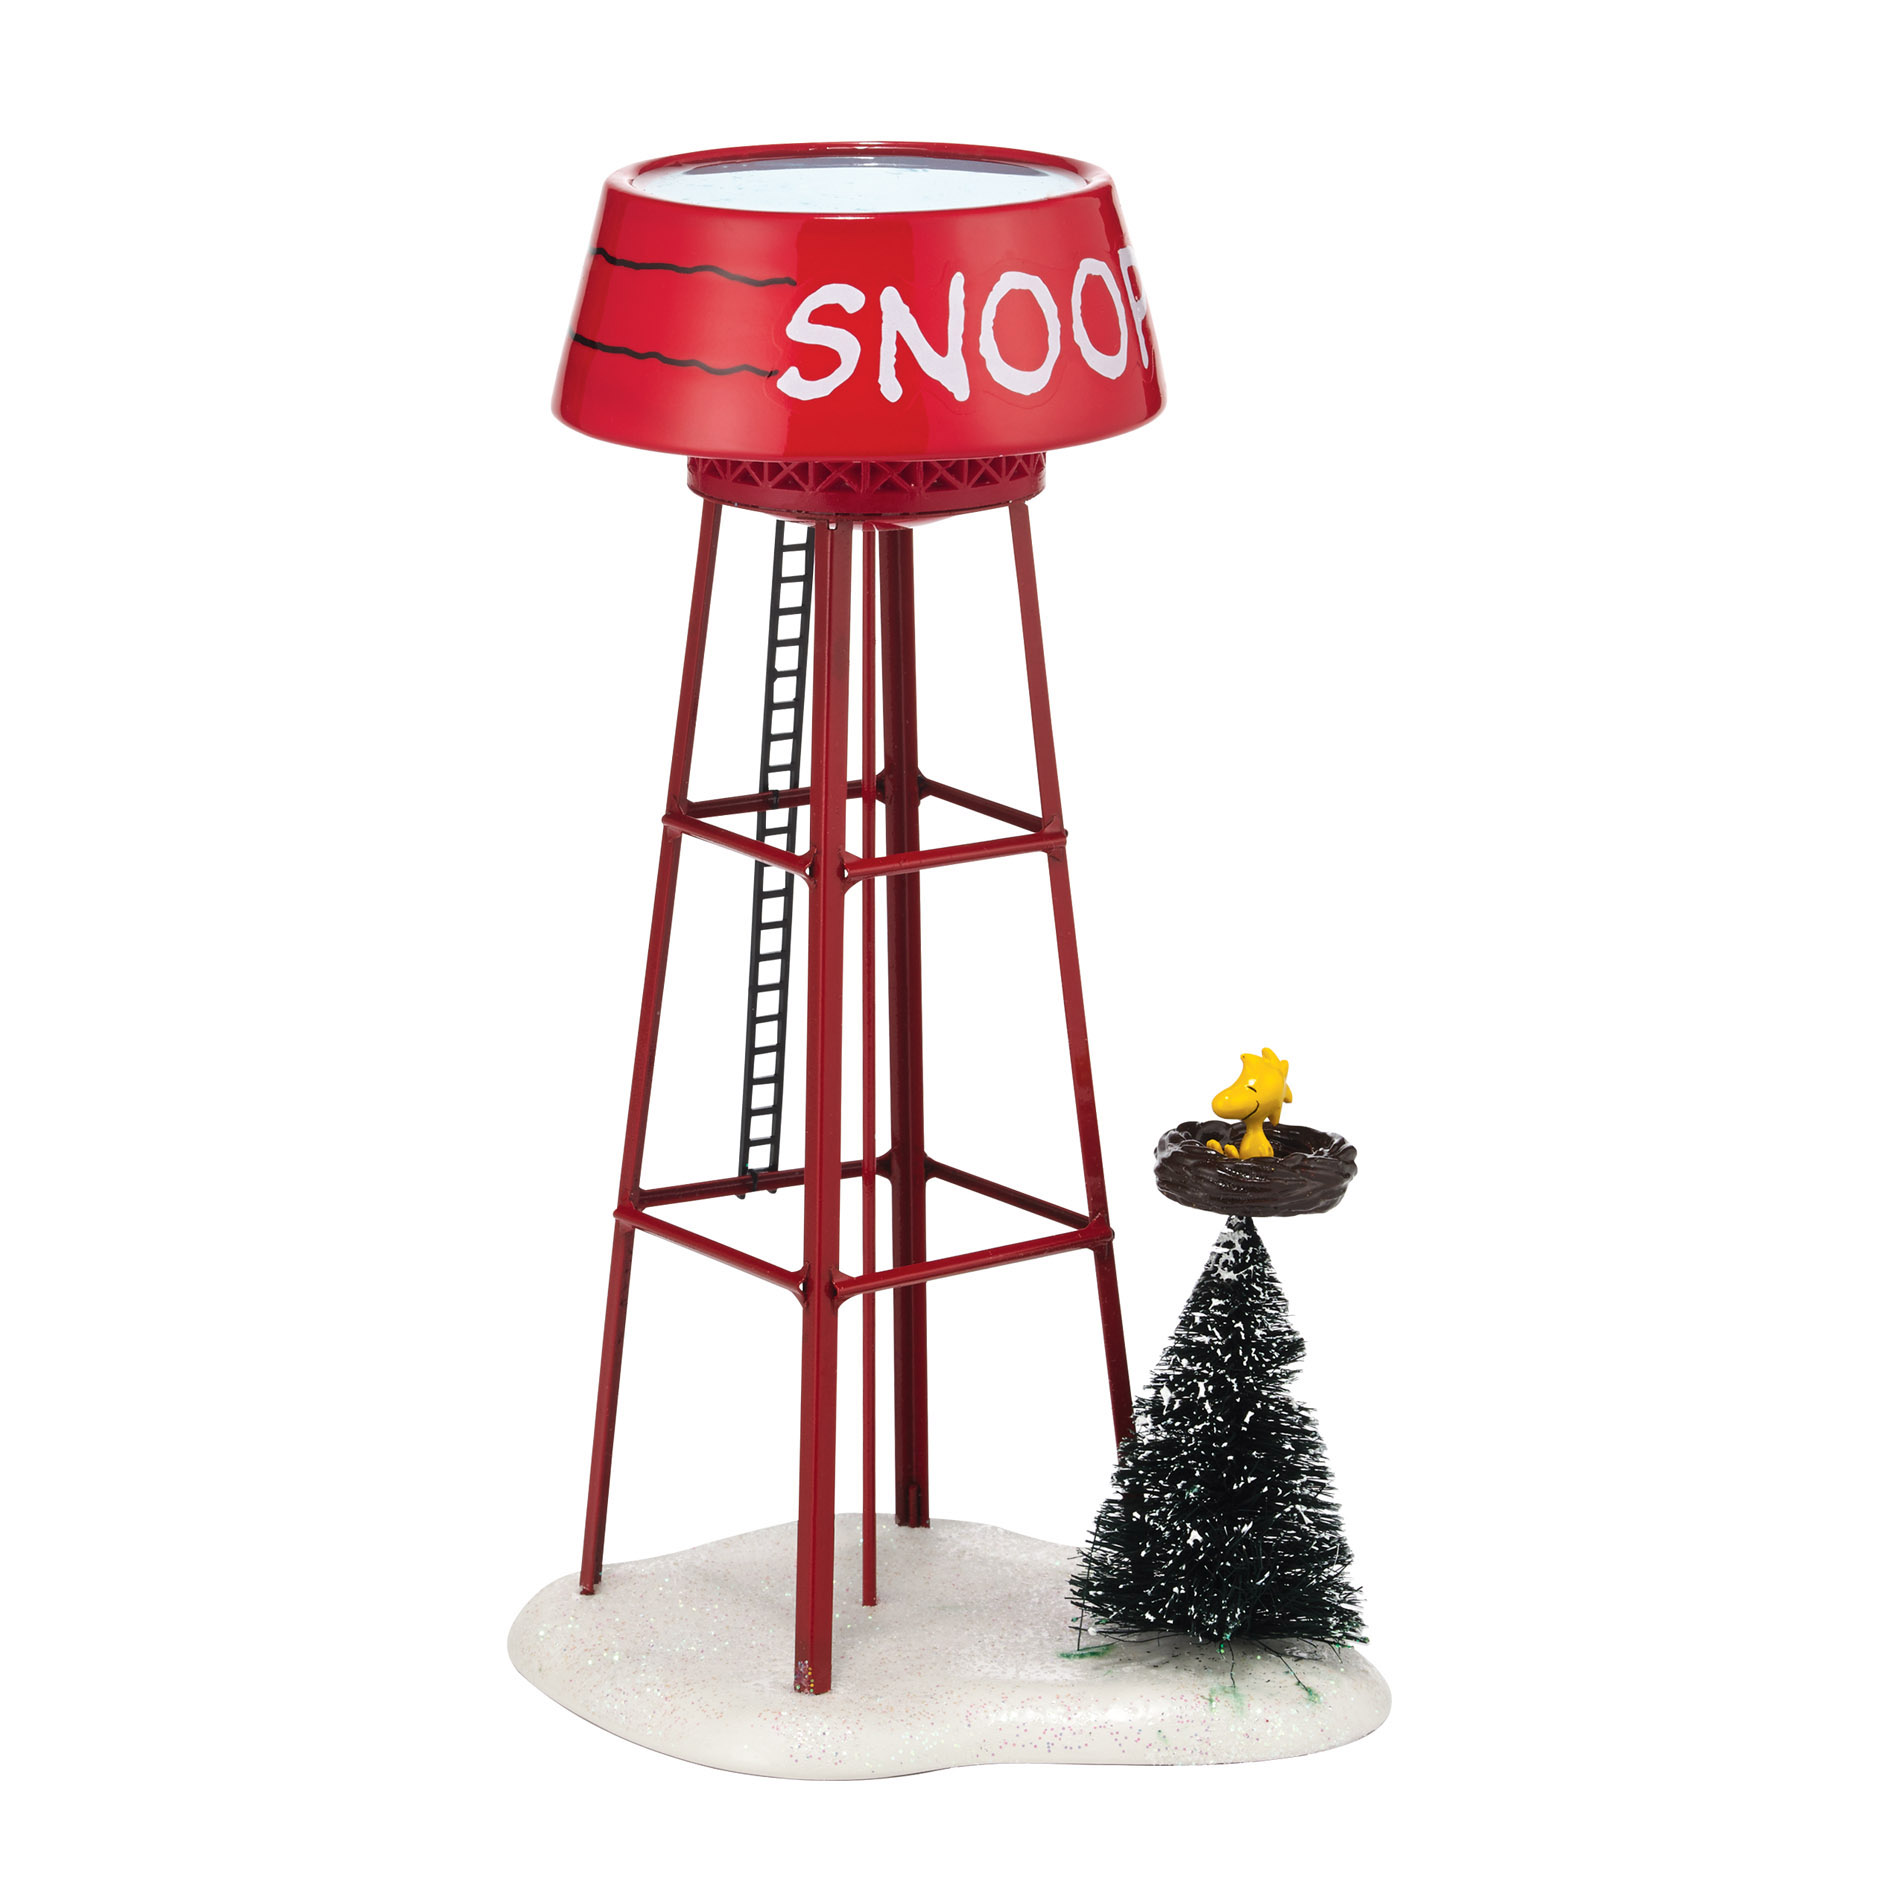 Dept 56 Snoopy Water Tower Collectible